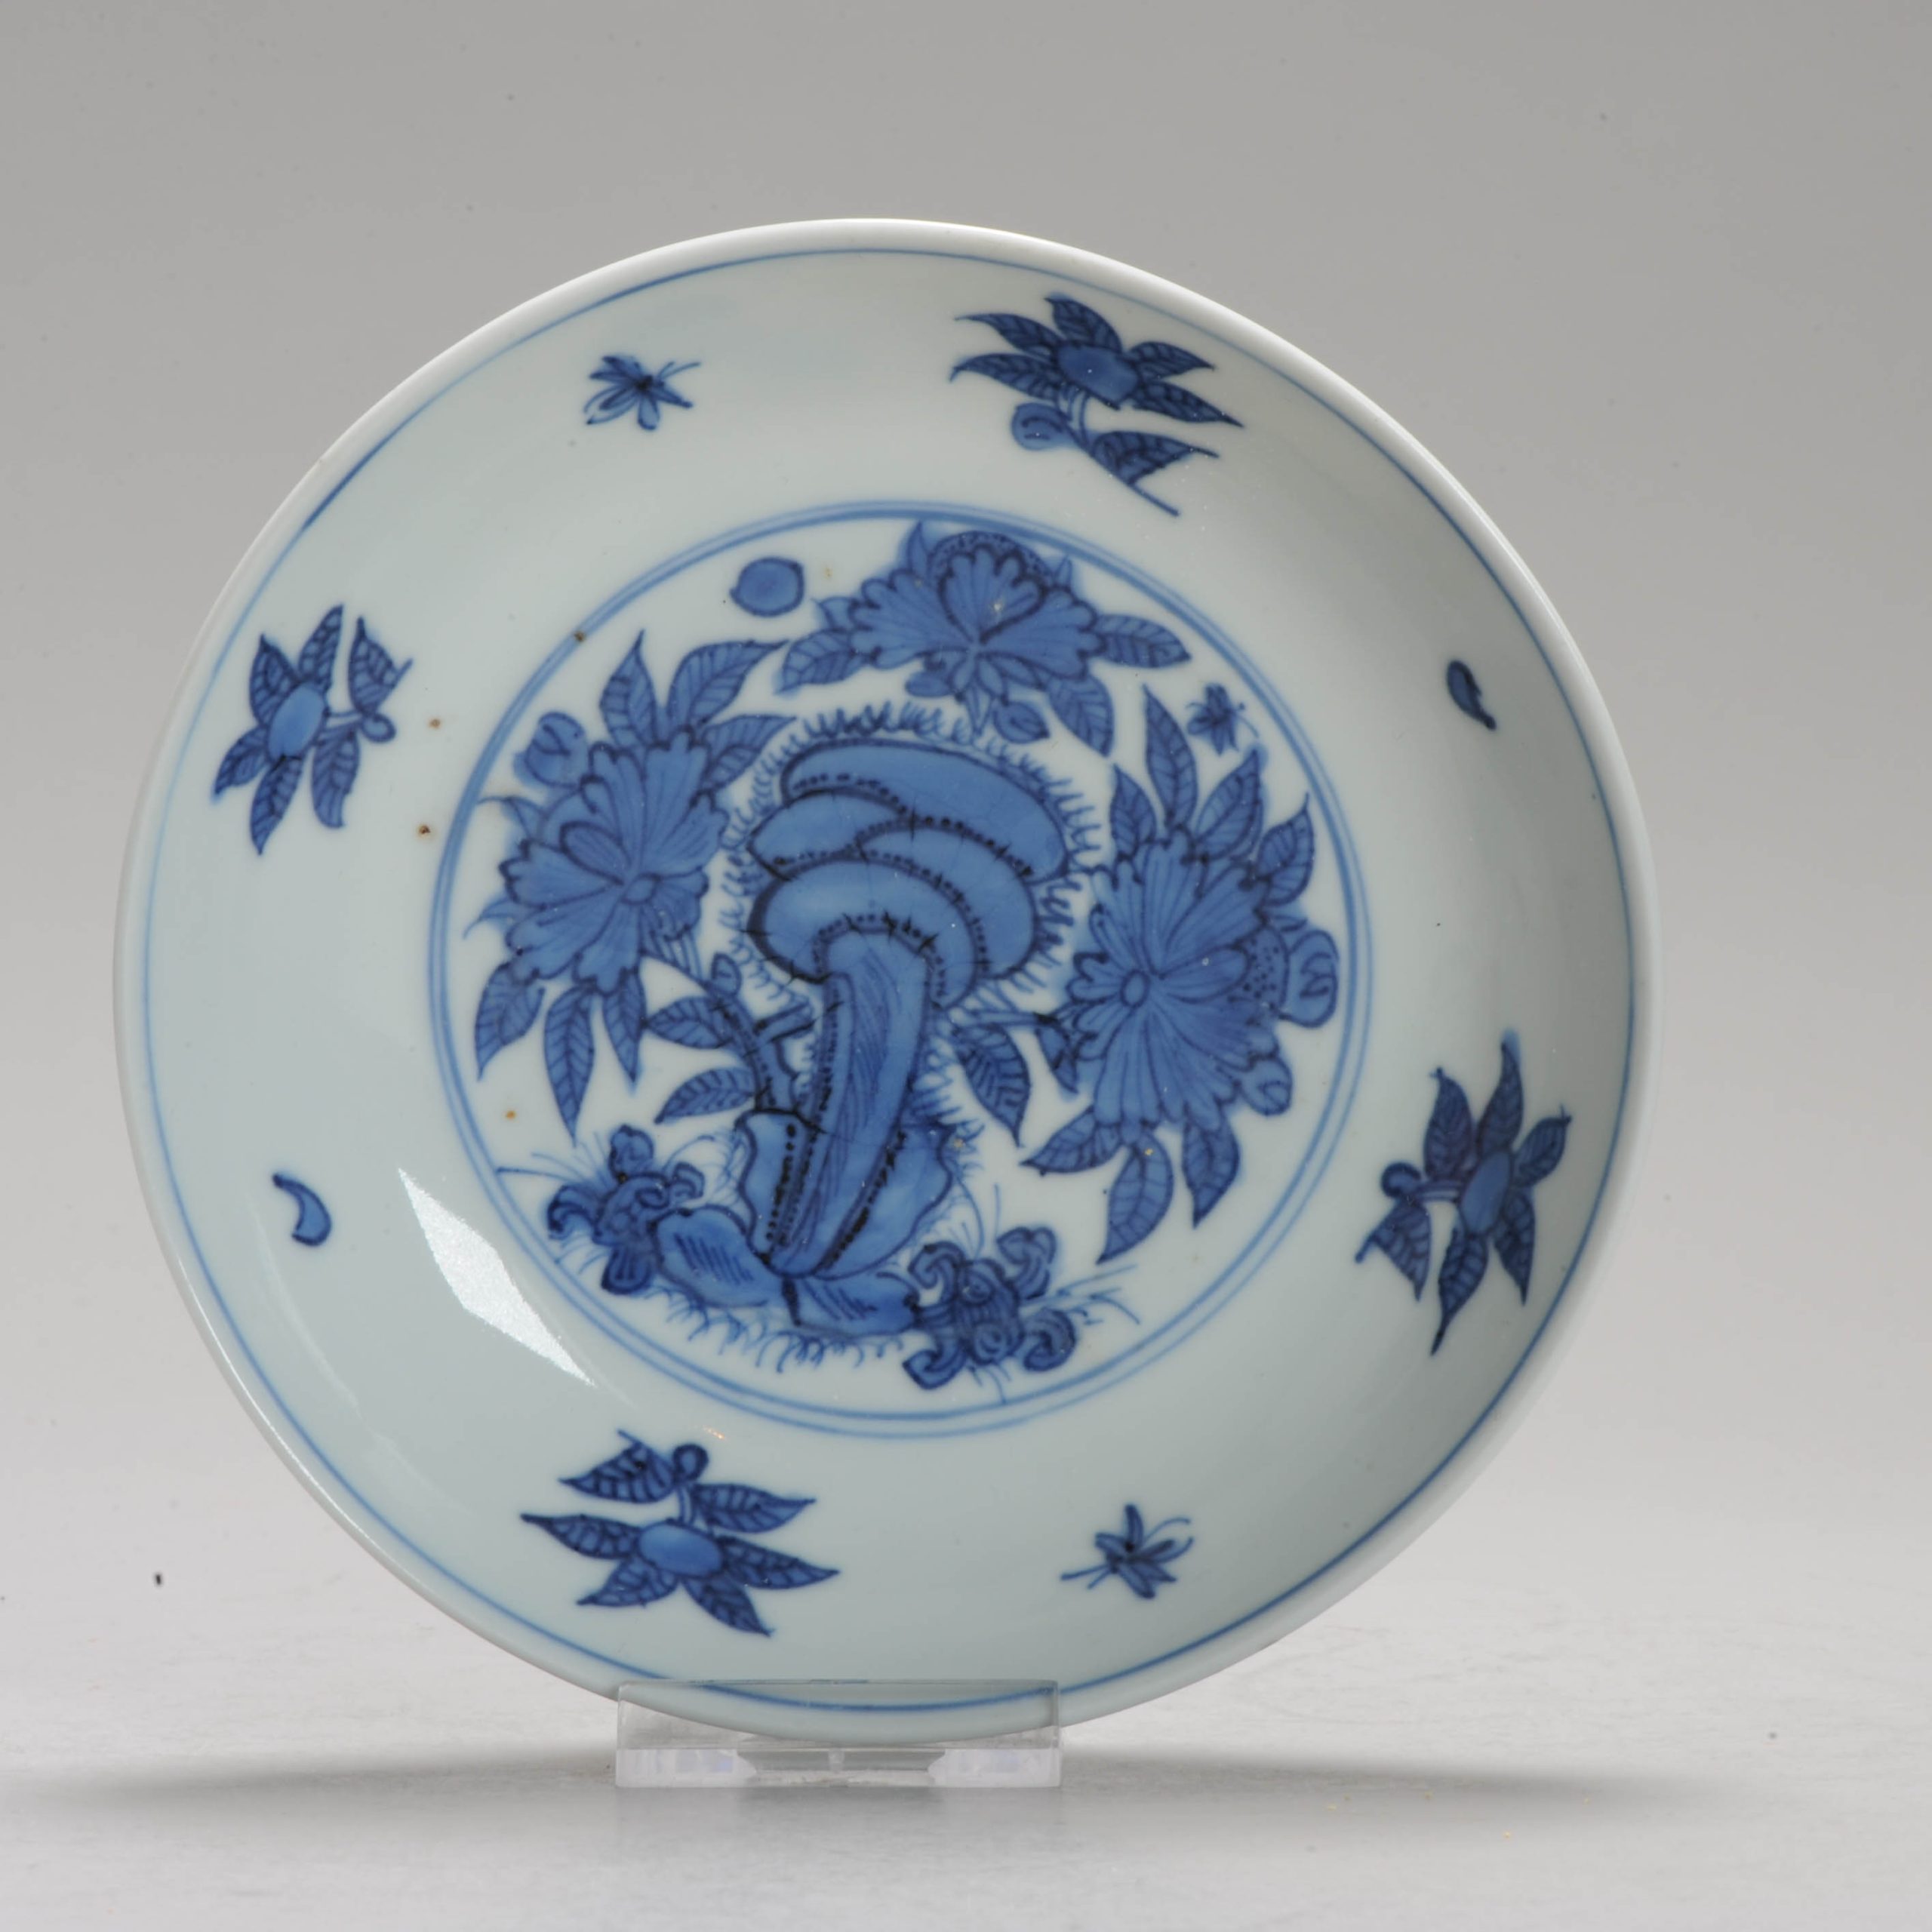 1194 A Chinese porcelain Ming Blue and White Plate with a Mushroom